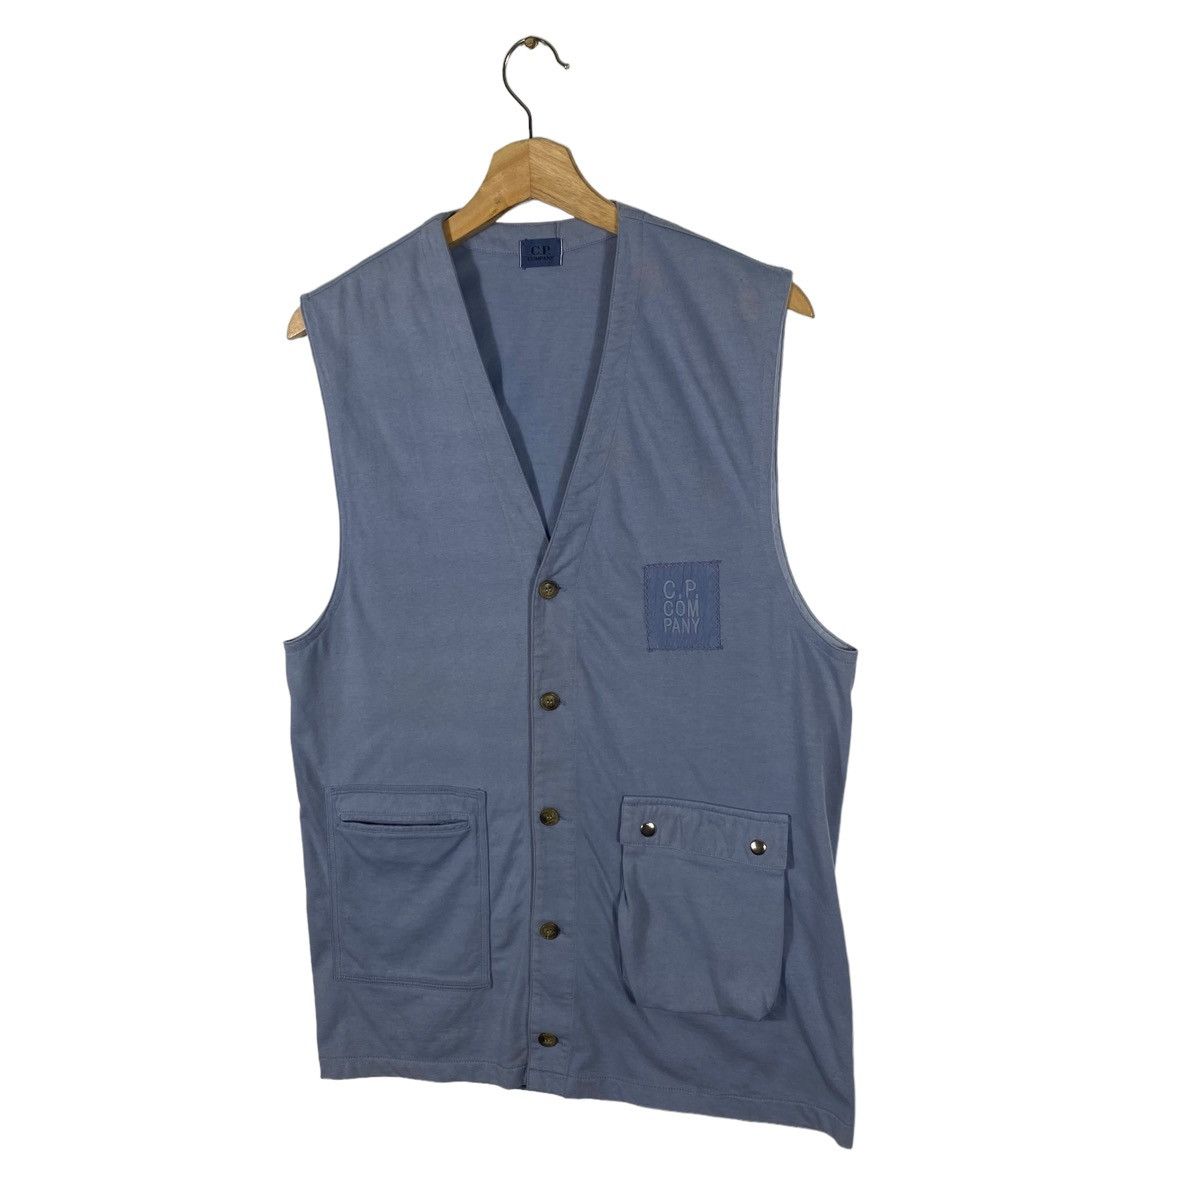 Vintage 90s Cp Company Ideas From Massimo Osti Vest - 4